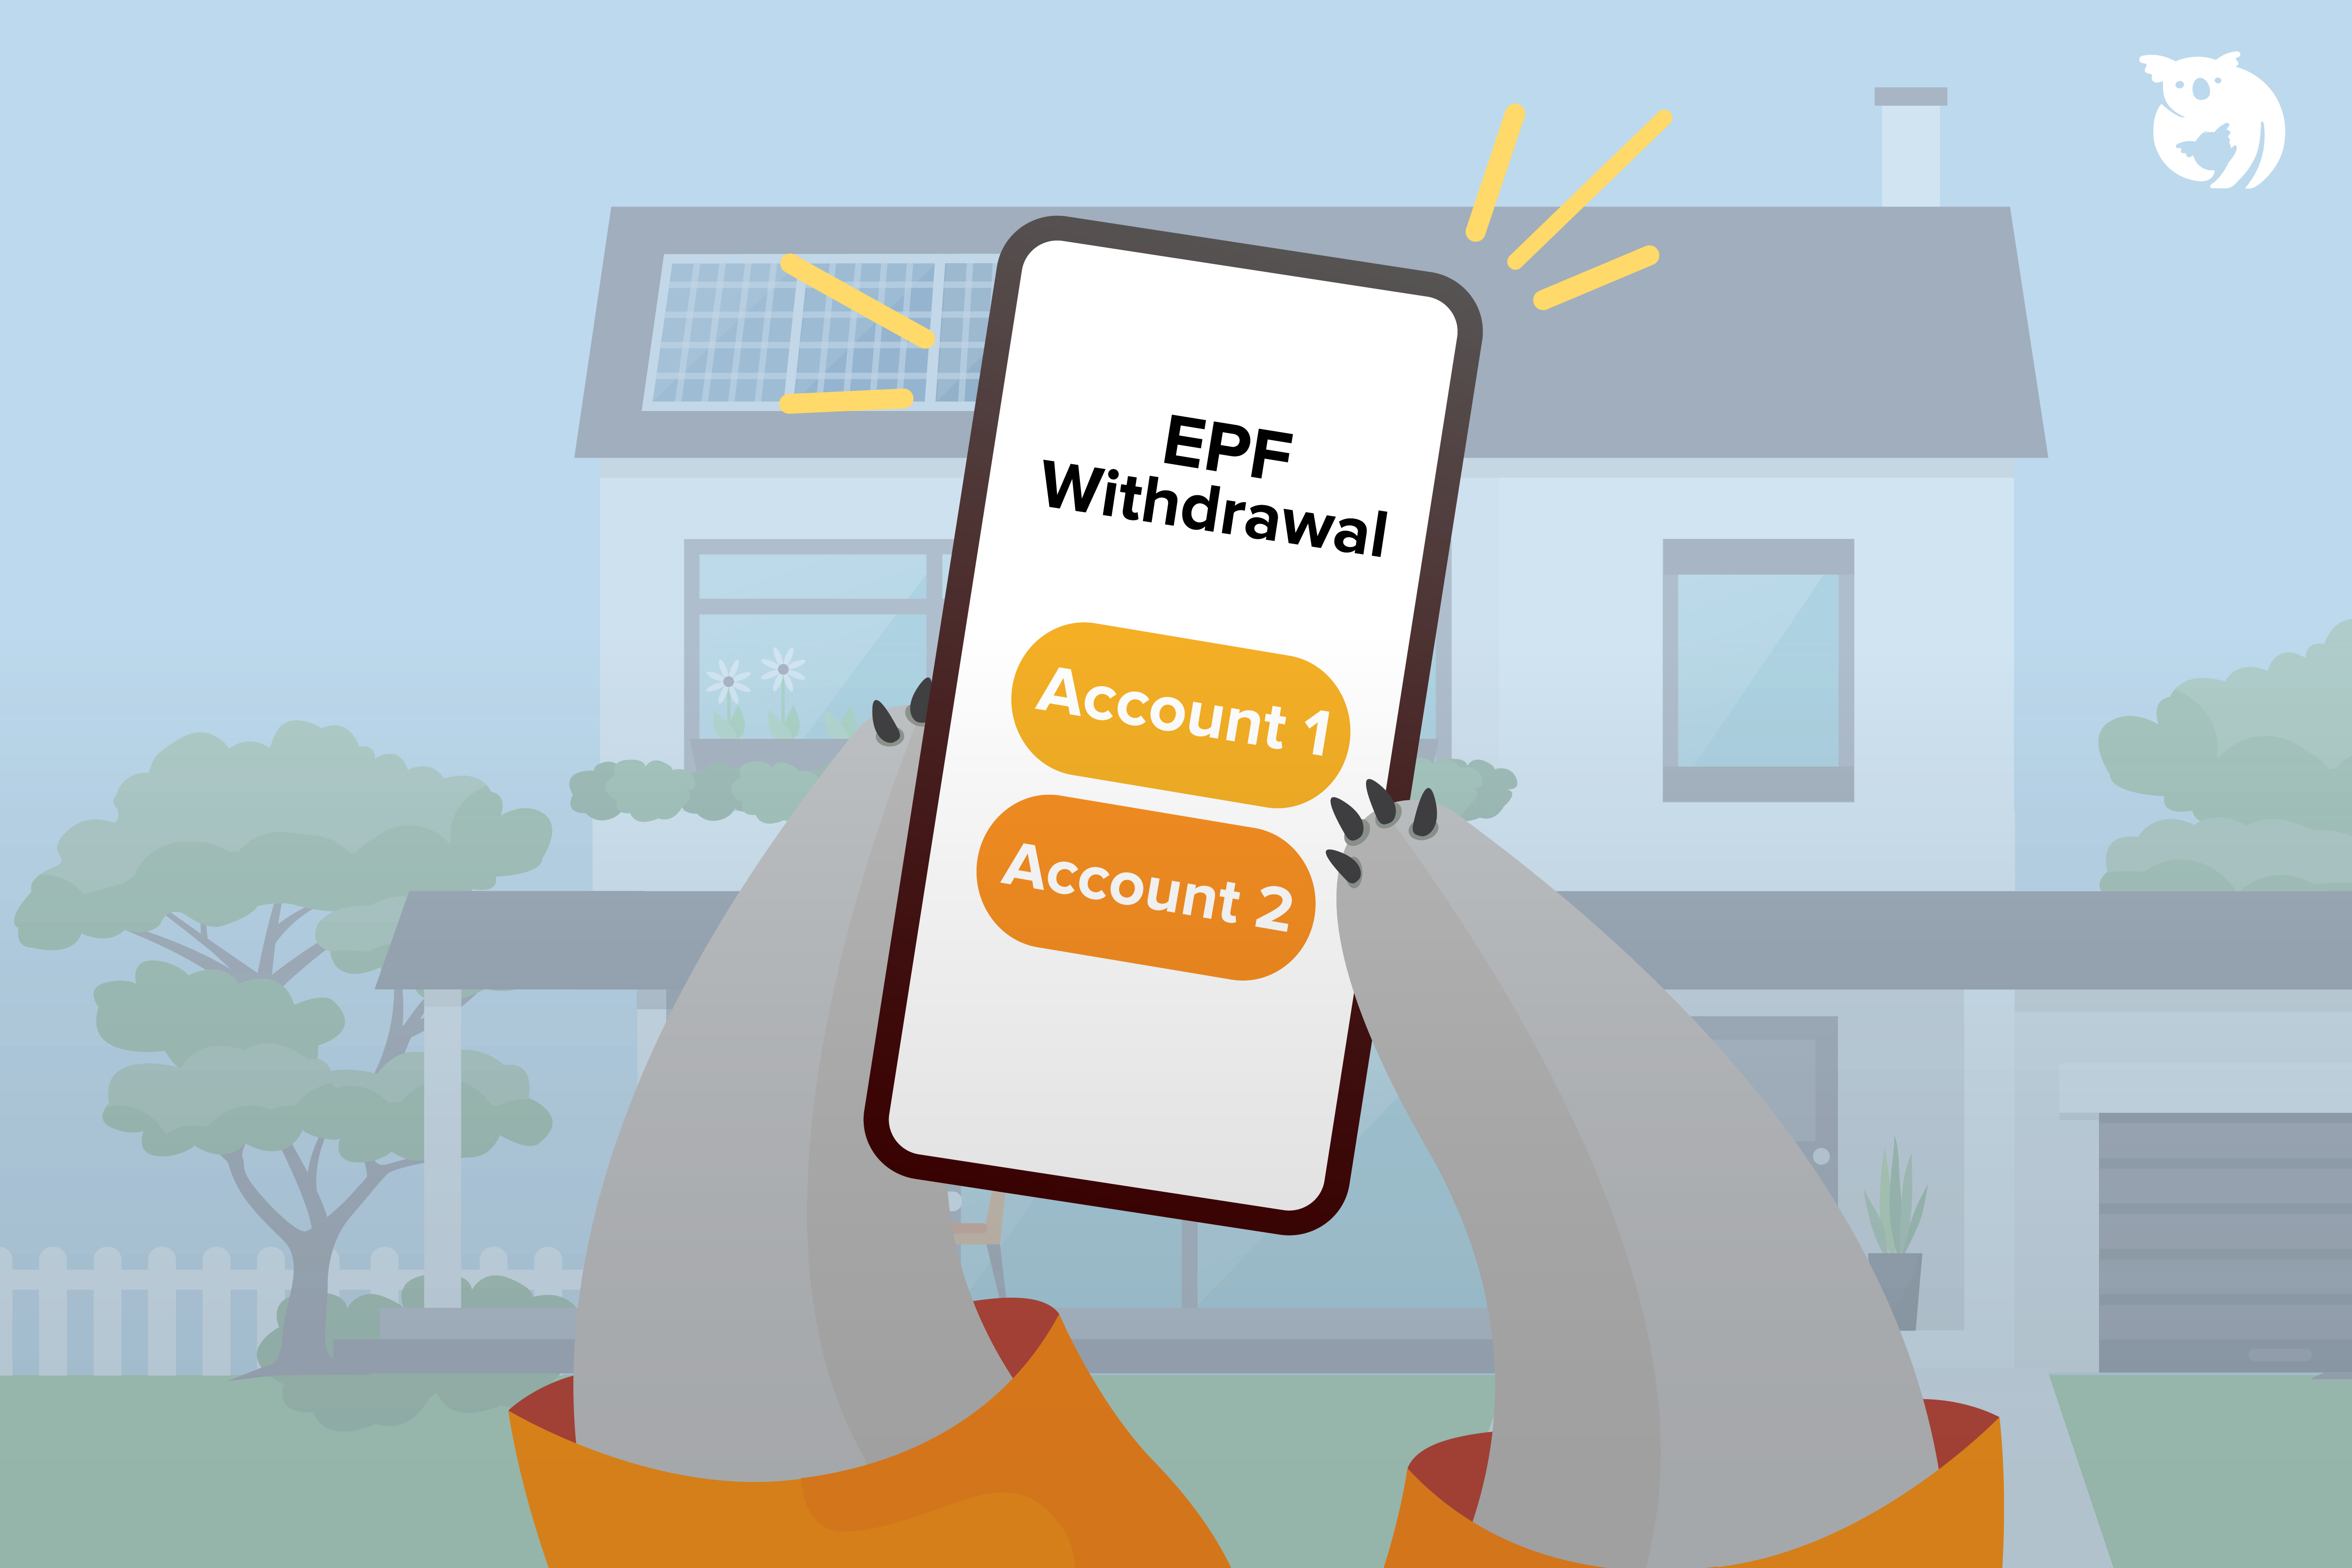 EPF Withdrawal for House: How to Withdraw from EPF Account 2?